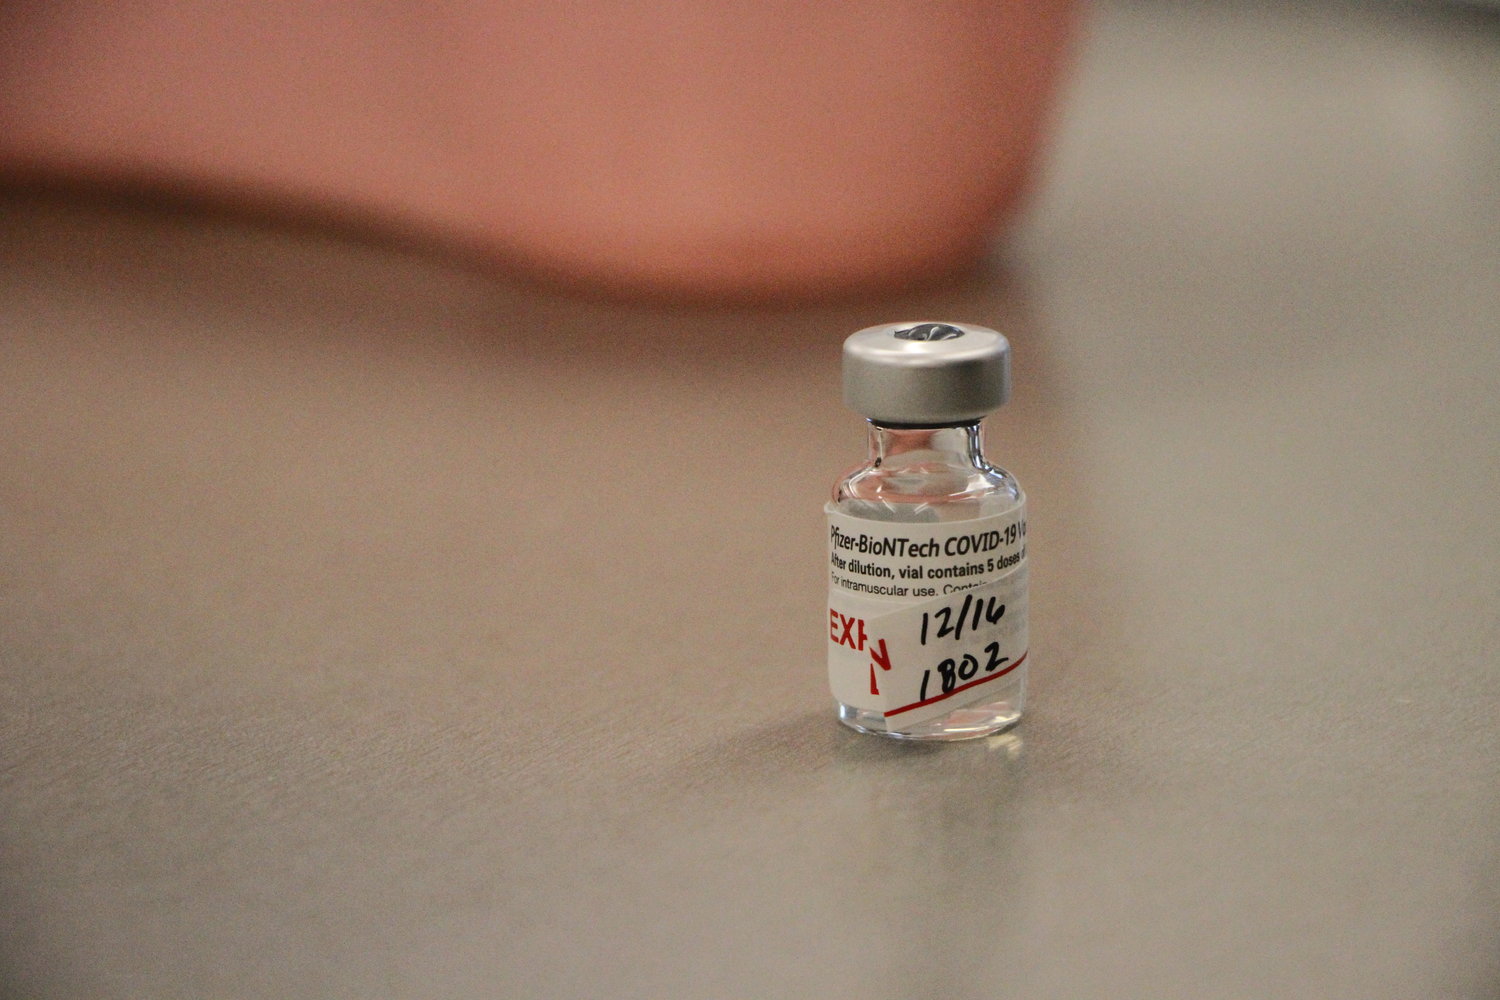 Each vial of the Pfizer-BioNTech COVID-19 vaccine contains five doses.